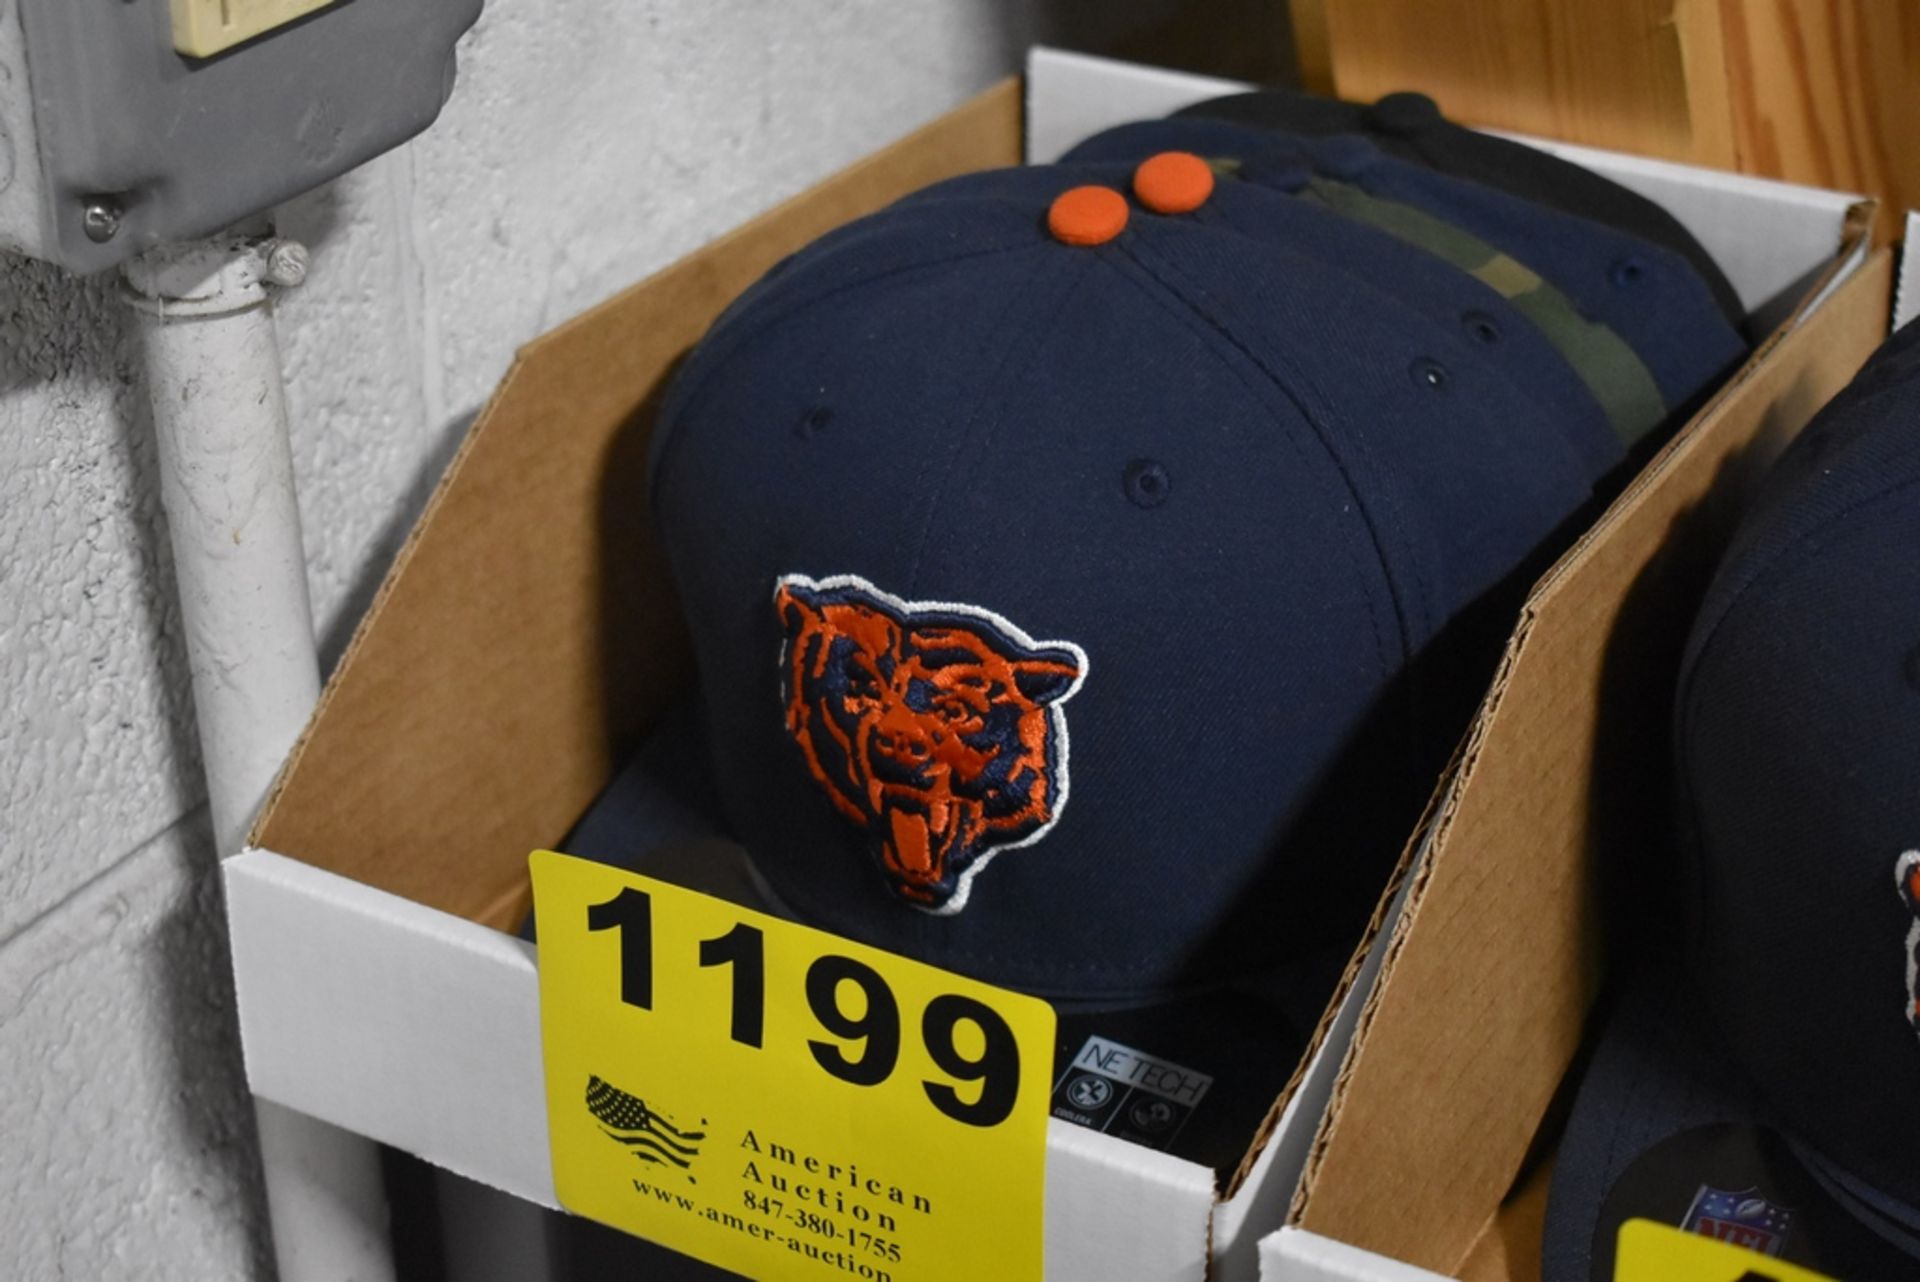 (5) CHICAGO BEARS BALL CAPS, SIZE 7